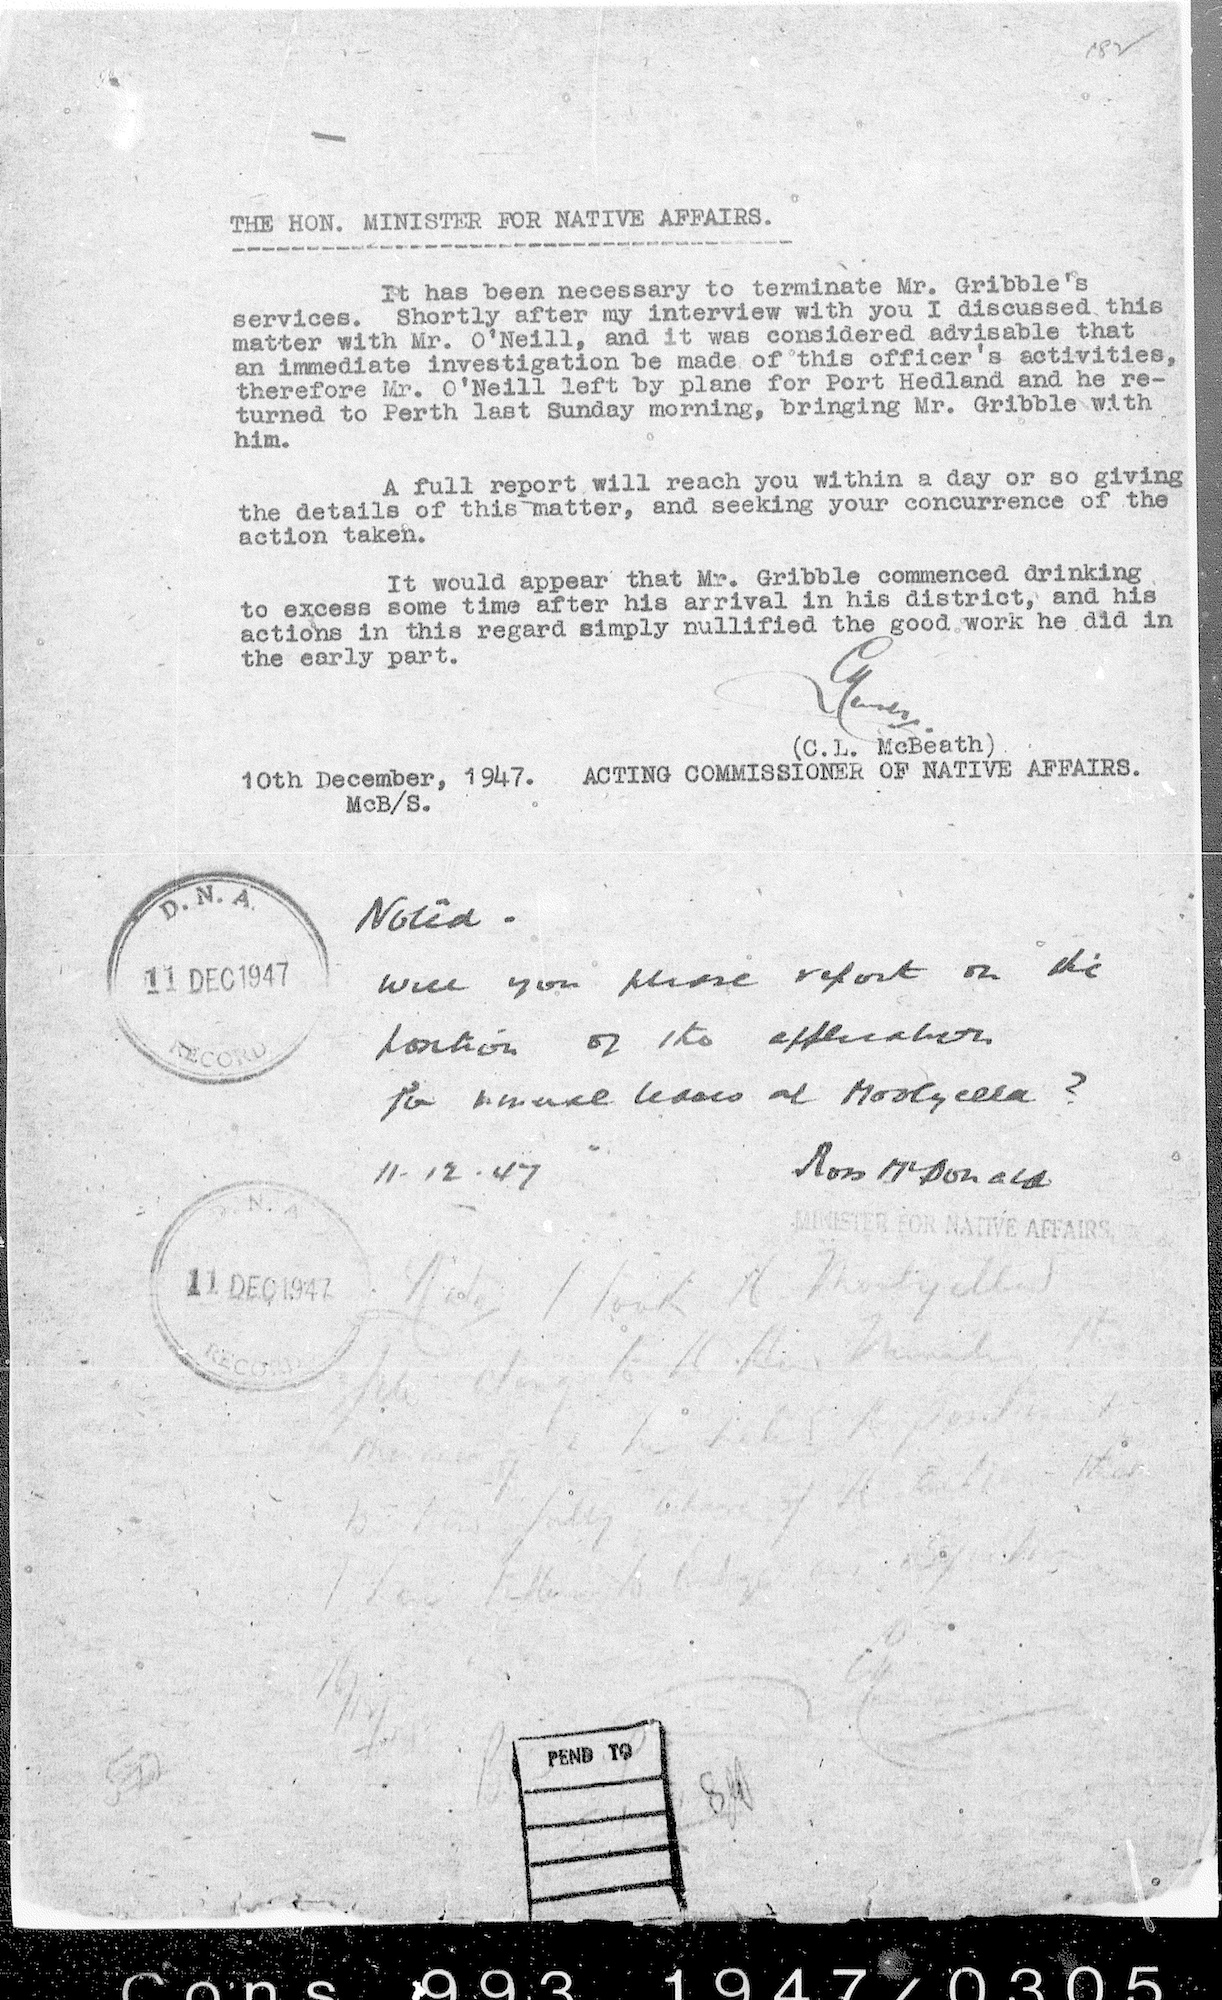 Acting Commissioner Lew McBeath to Minister for Native Affairs Ross McDonald, 10 December 1947